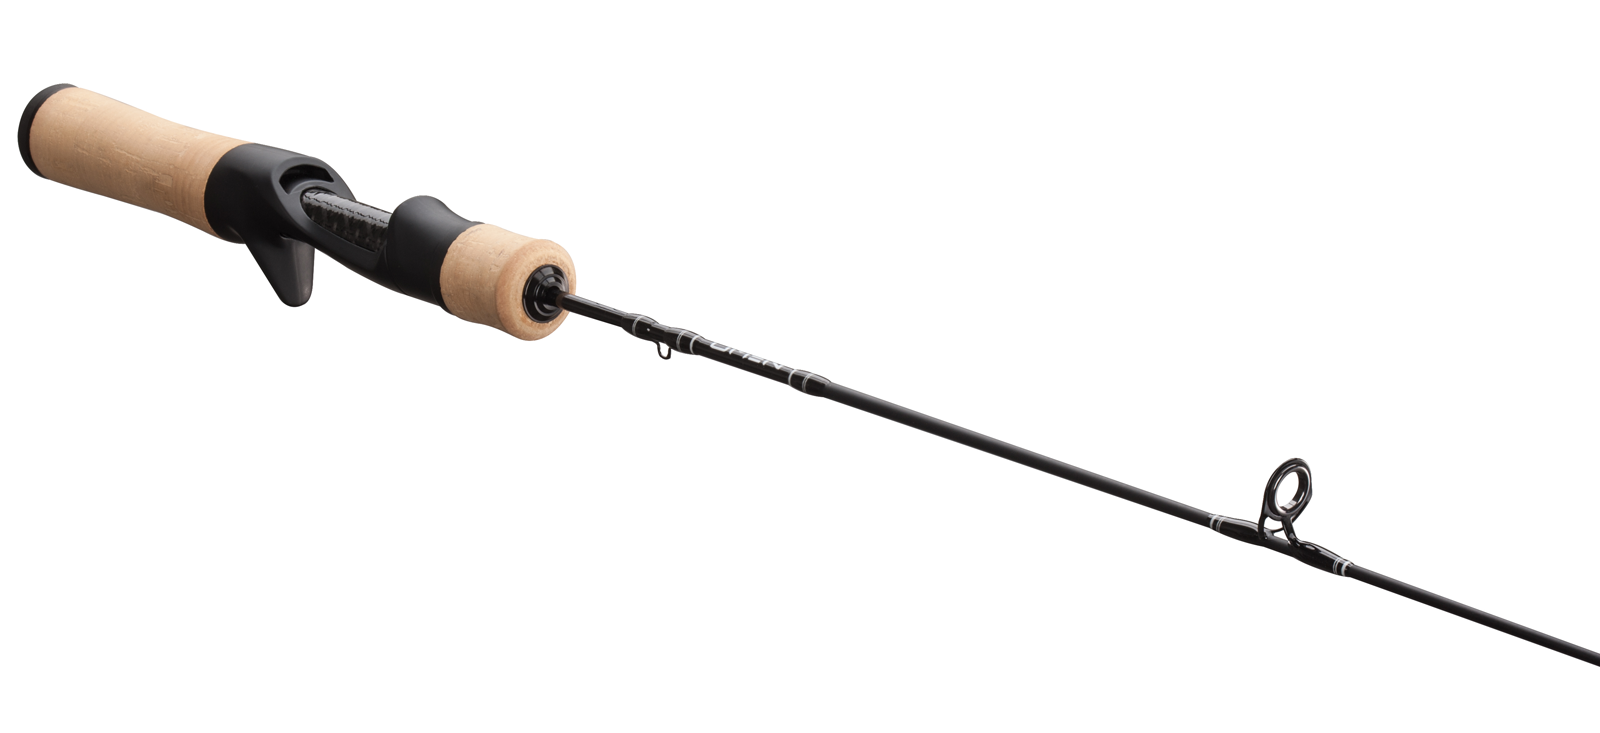 Fishing Rod Review - 13 Omen OBC73M casting rod review